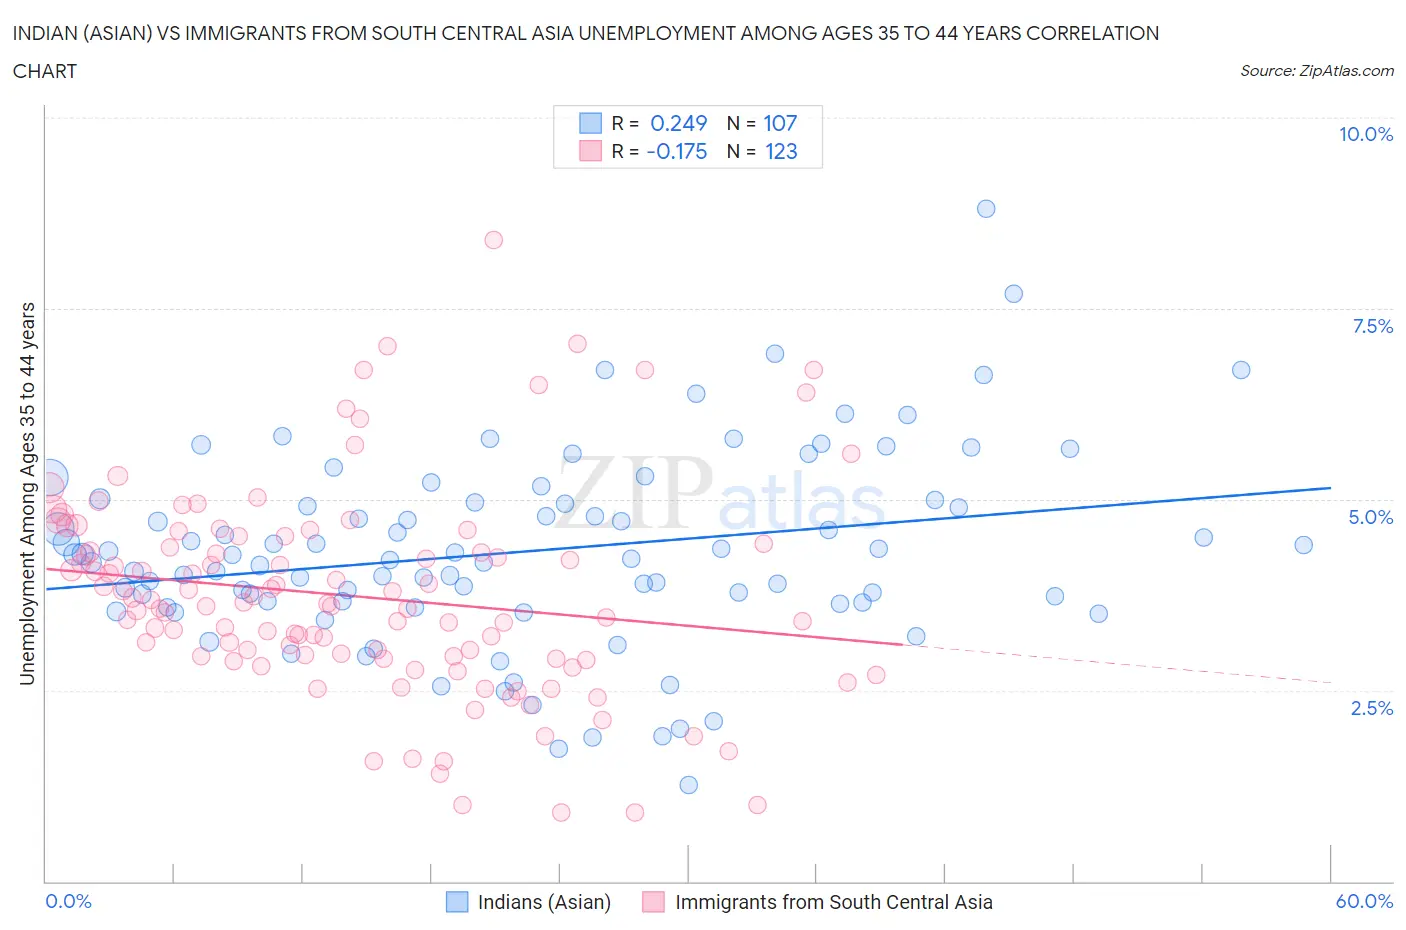 Indian (Asian) vs Immigrants from South Central Asia Unemployment Among Ages 35 to 44 years